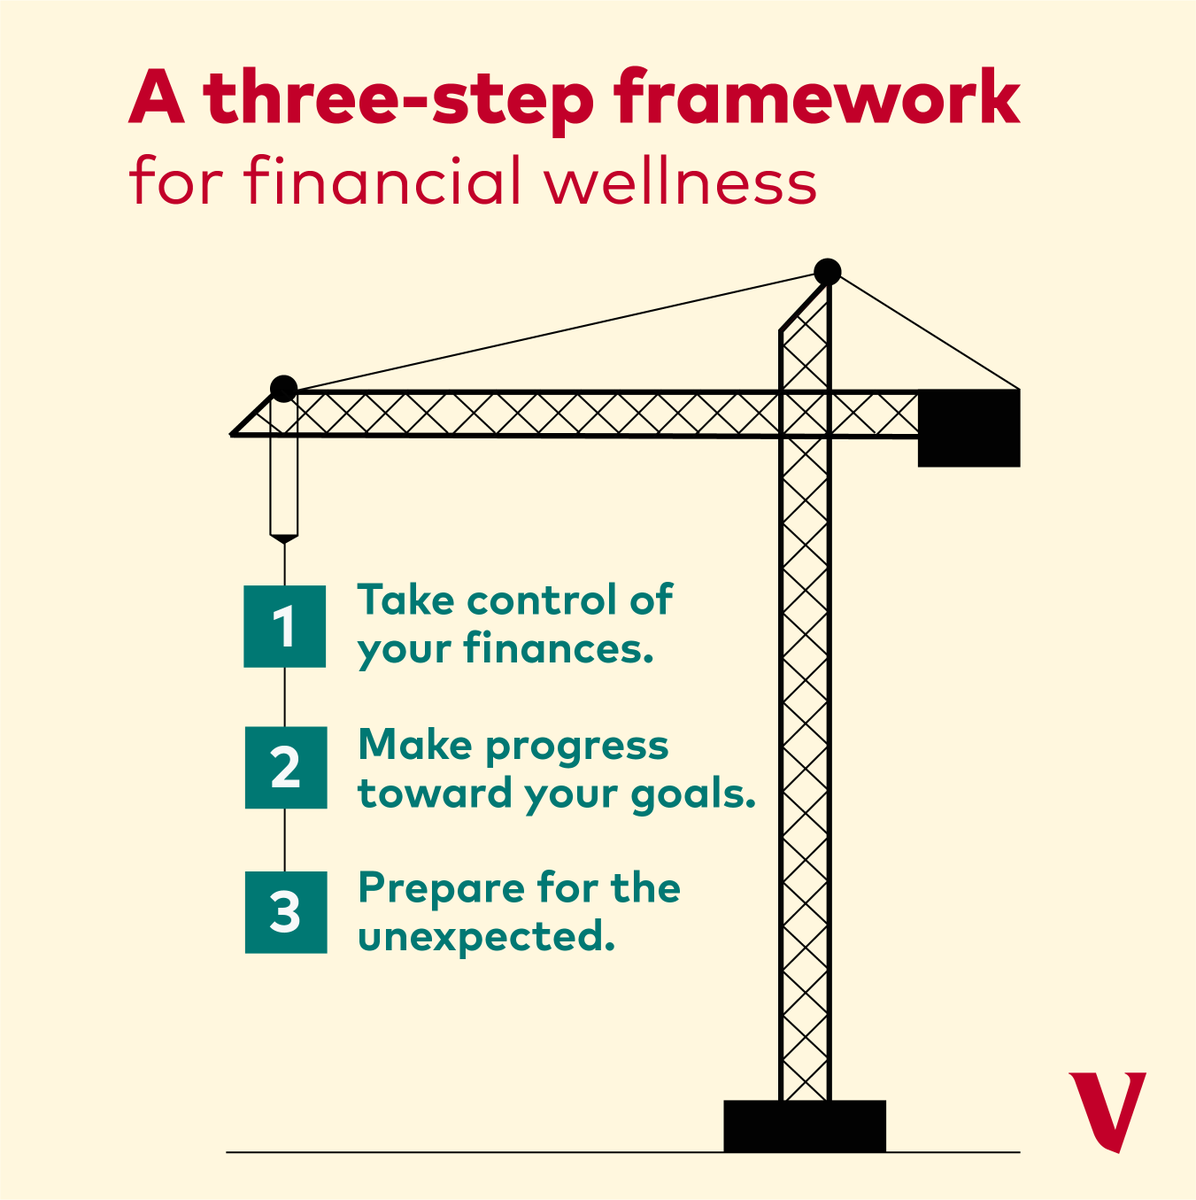 Every building block is a victory in building your financial foundation. Our financial wellness guide lays out a three-step framework to help you make progress towards your goals, no matter where you are on your journey. bit.ly/43Y0qg0 #FinancialWellness #Finance101